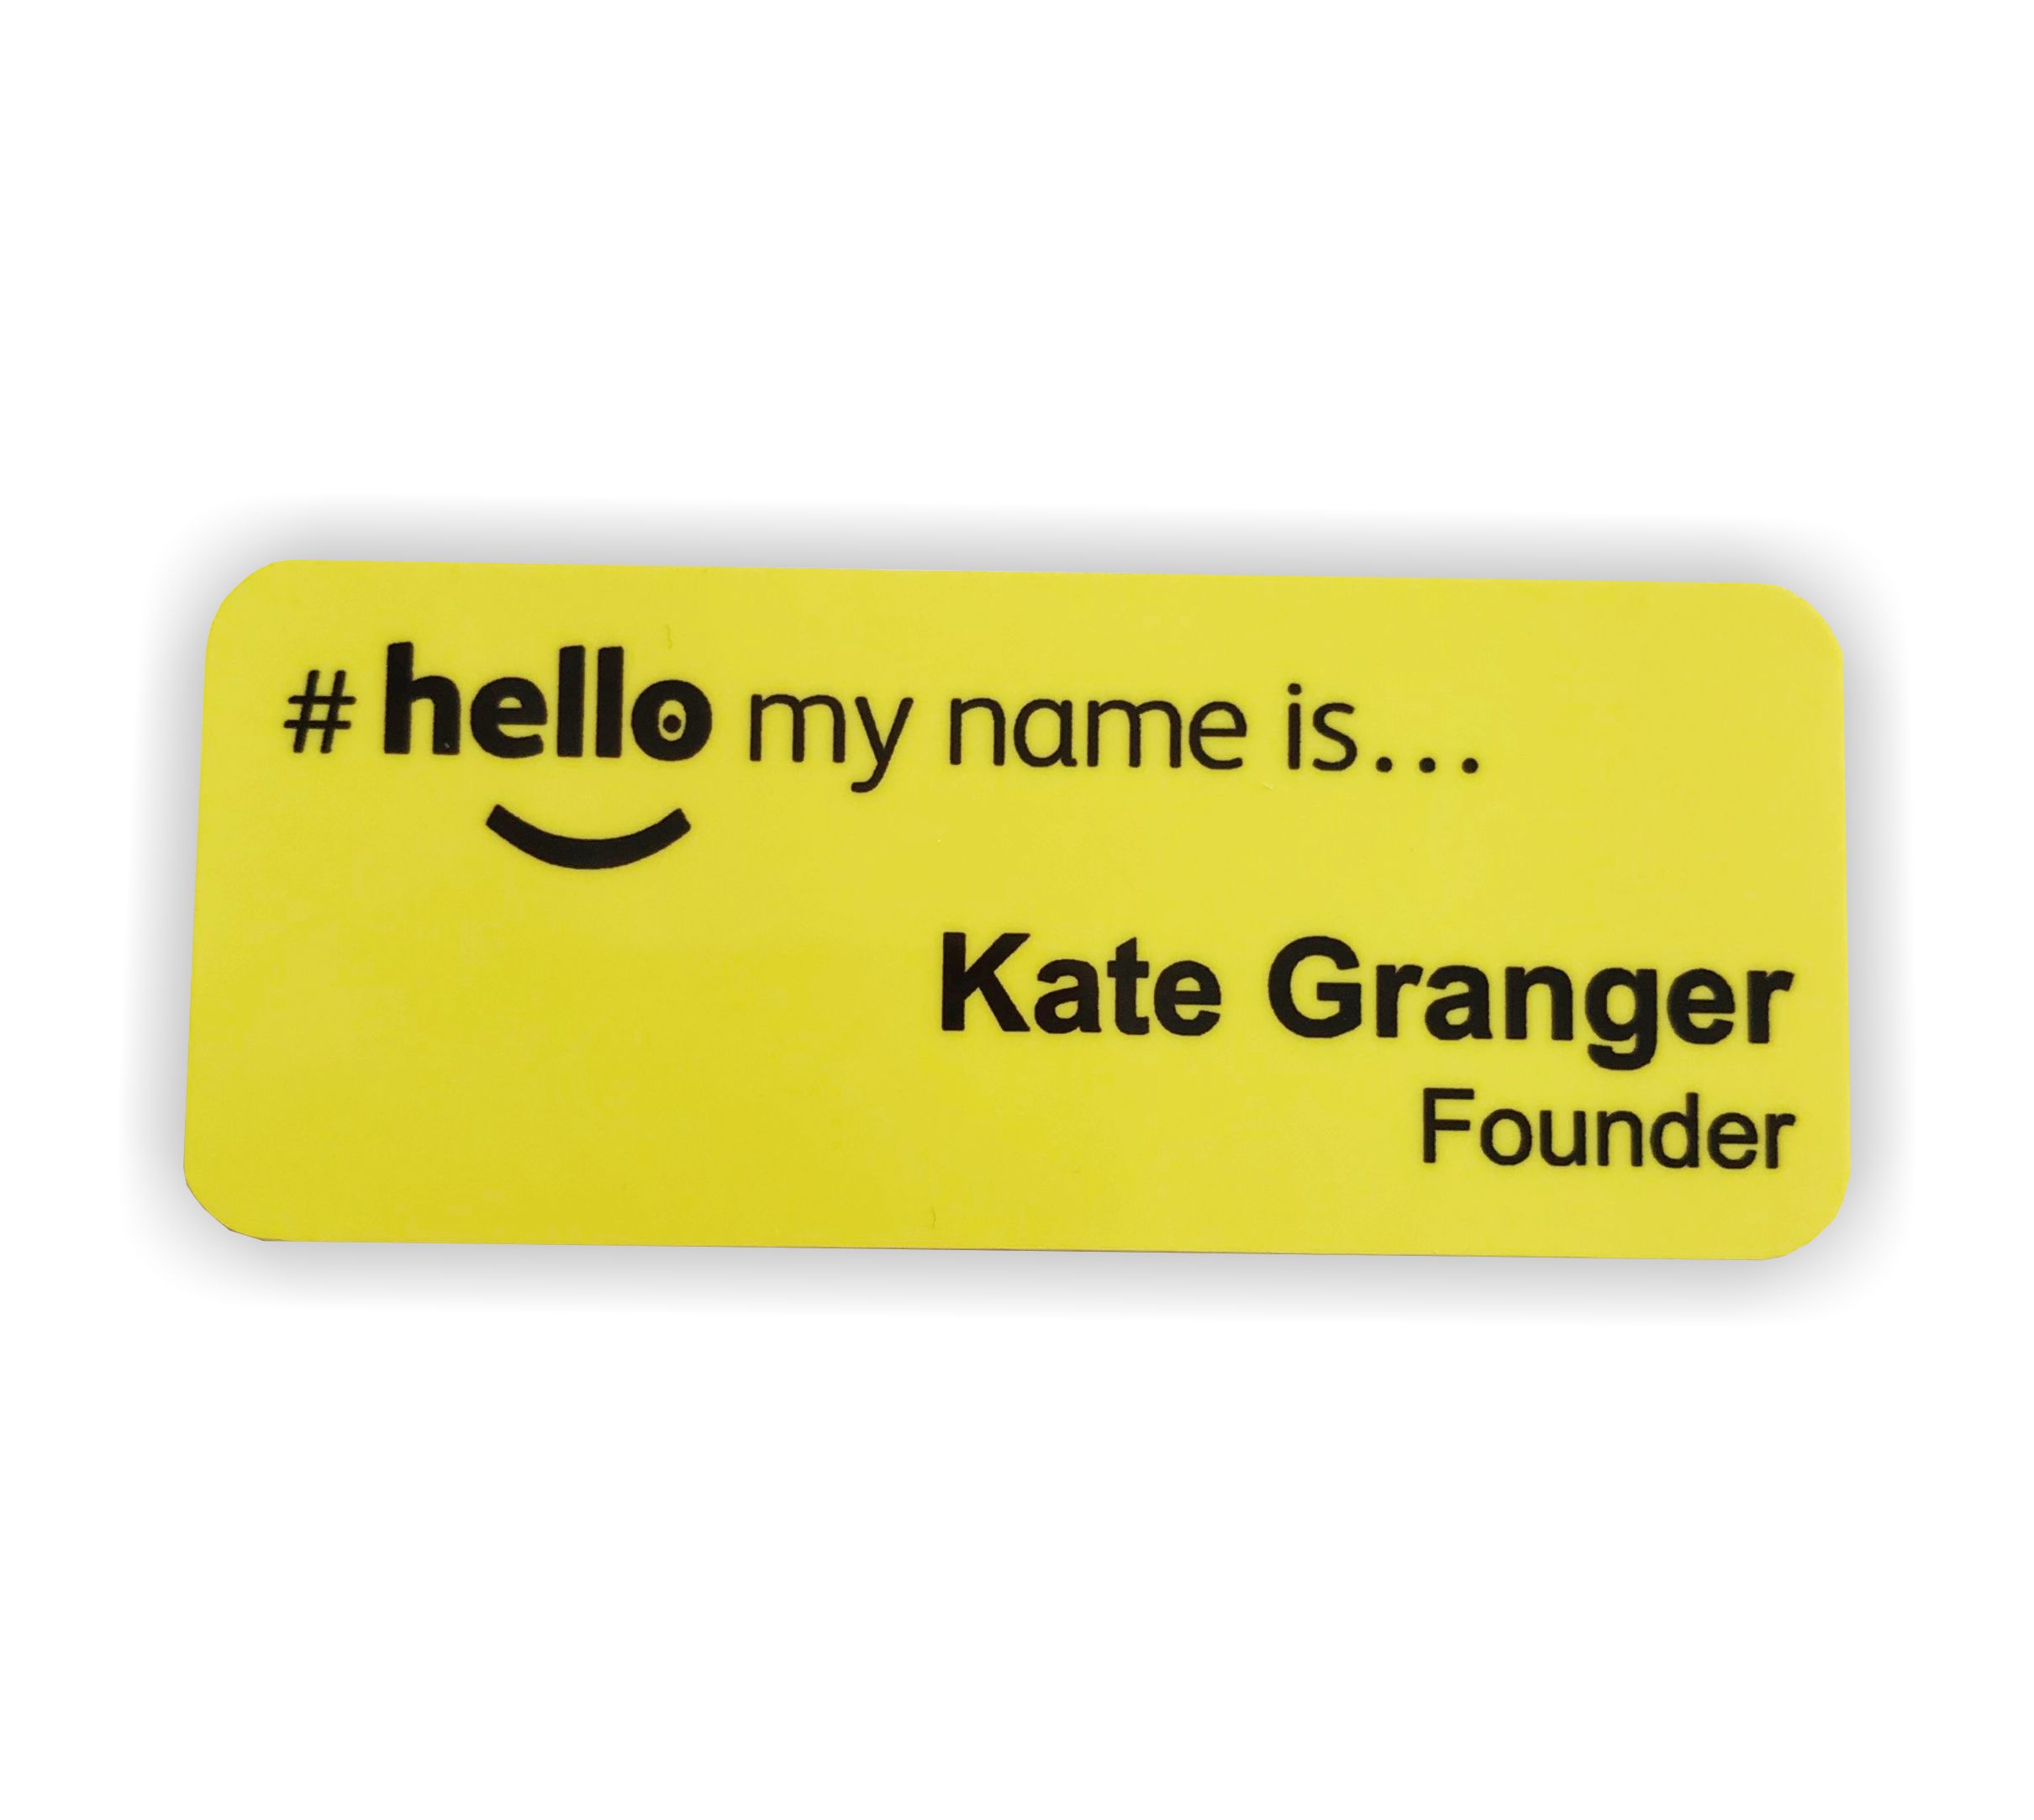 Patient Friendly Hello my name is badge